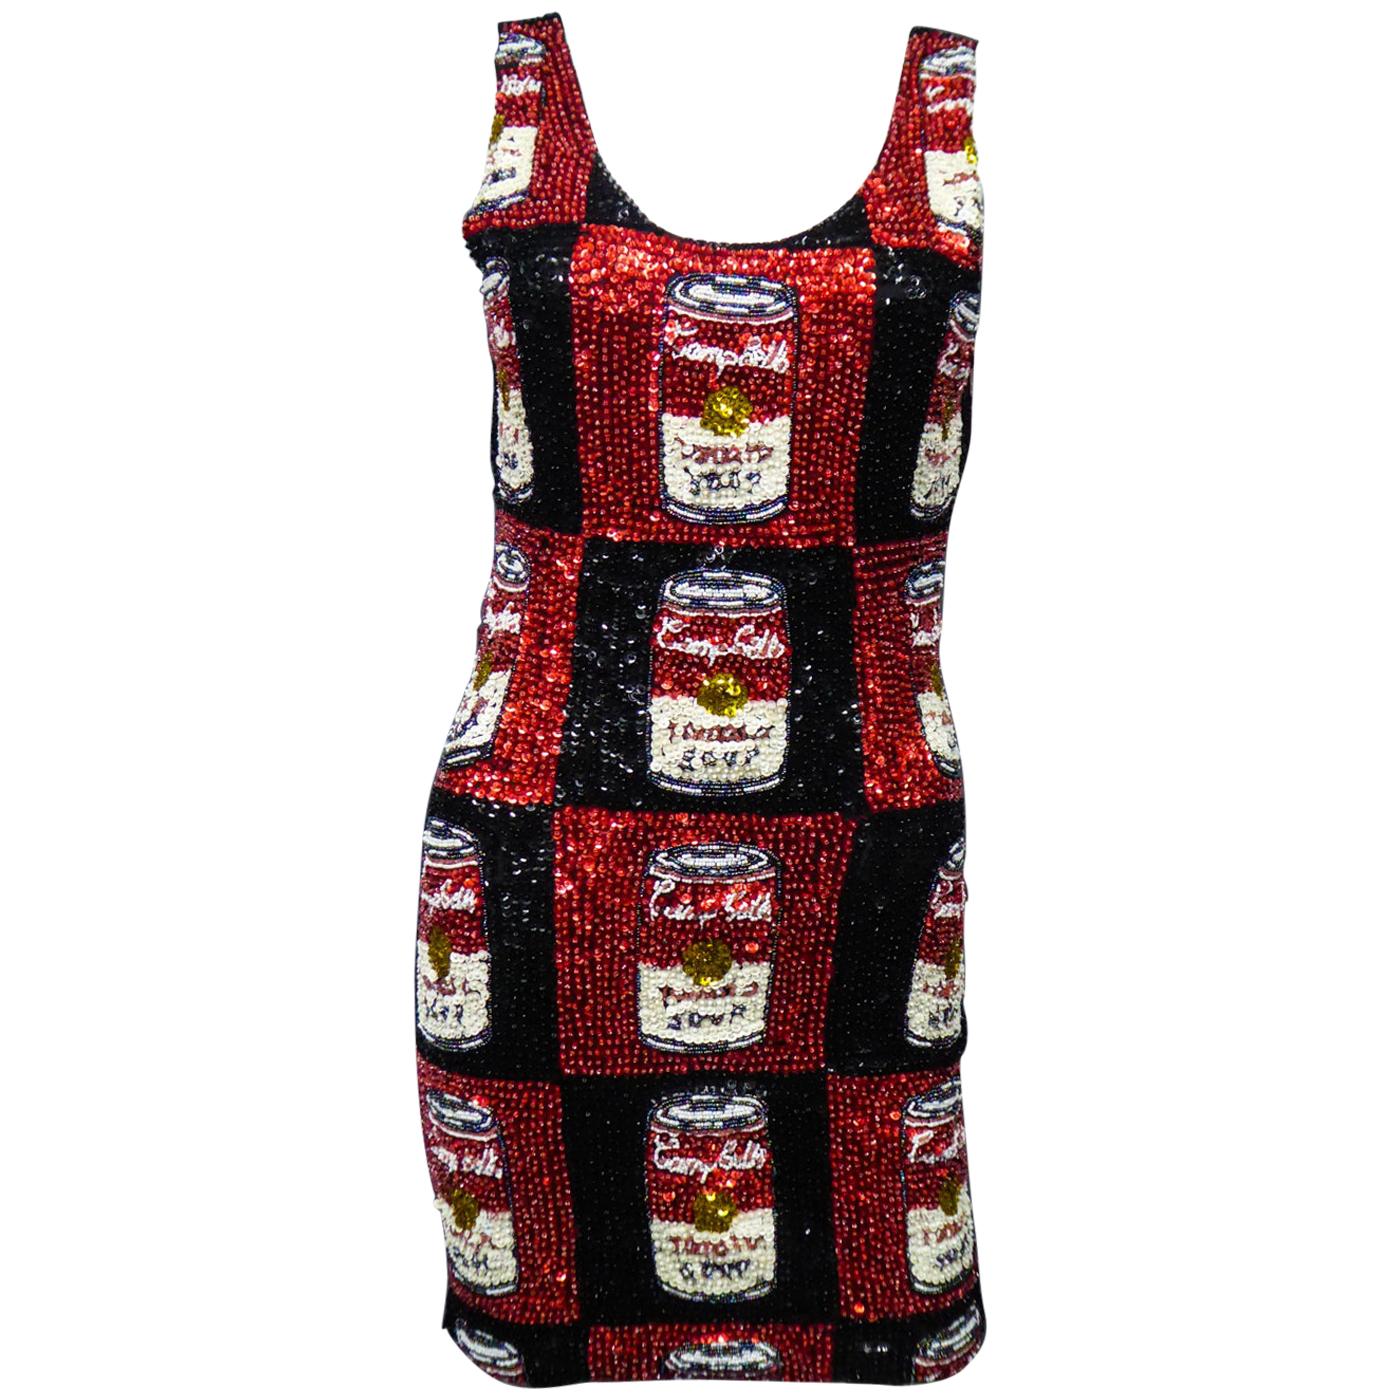 A Campbell's Soup Embroidered Mini Dress Andy Warhol Pink Soda Circa 1990